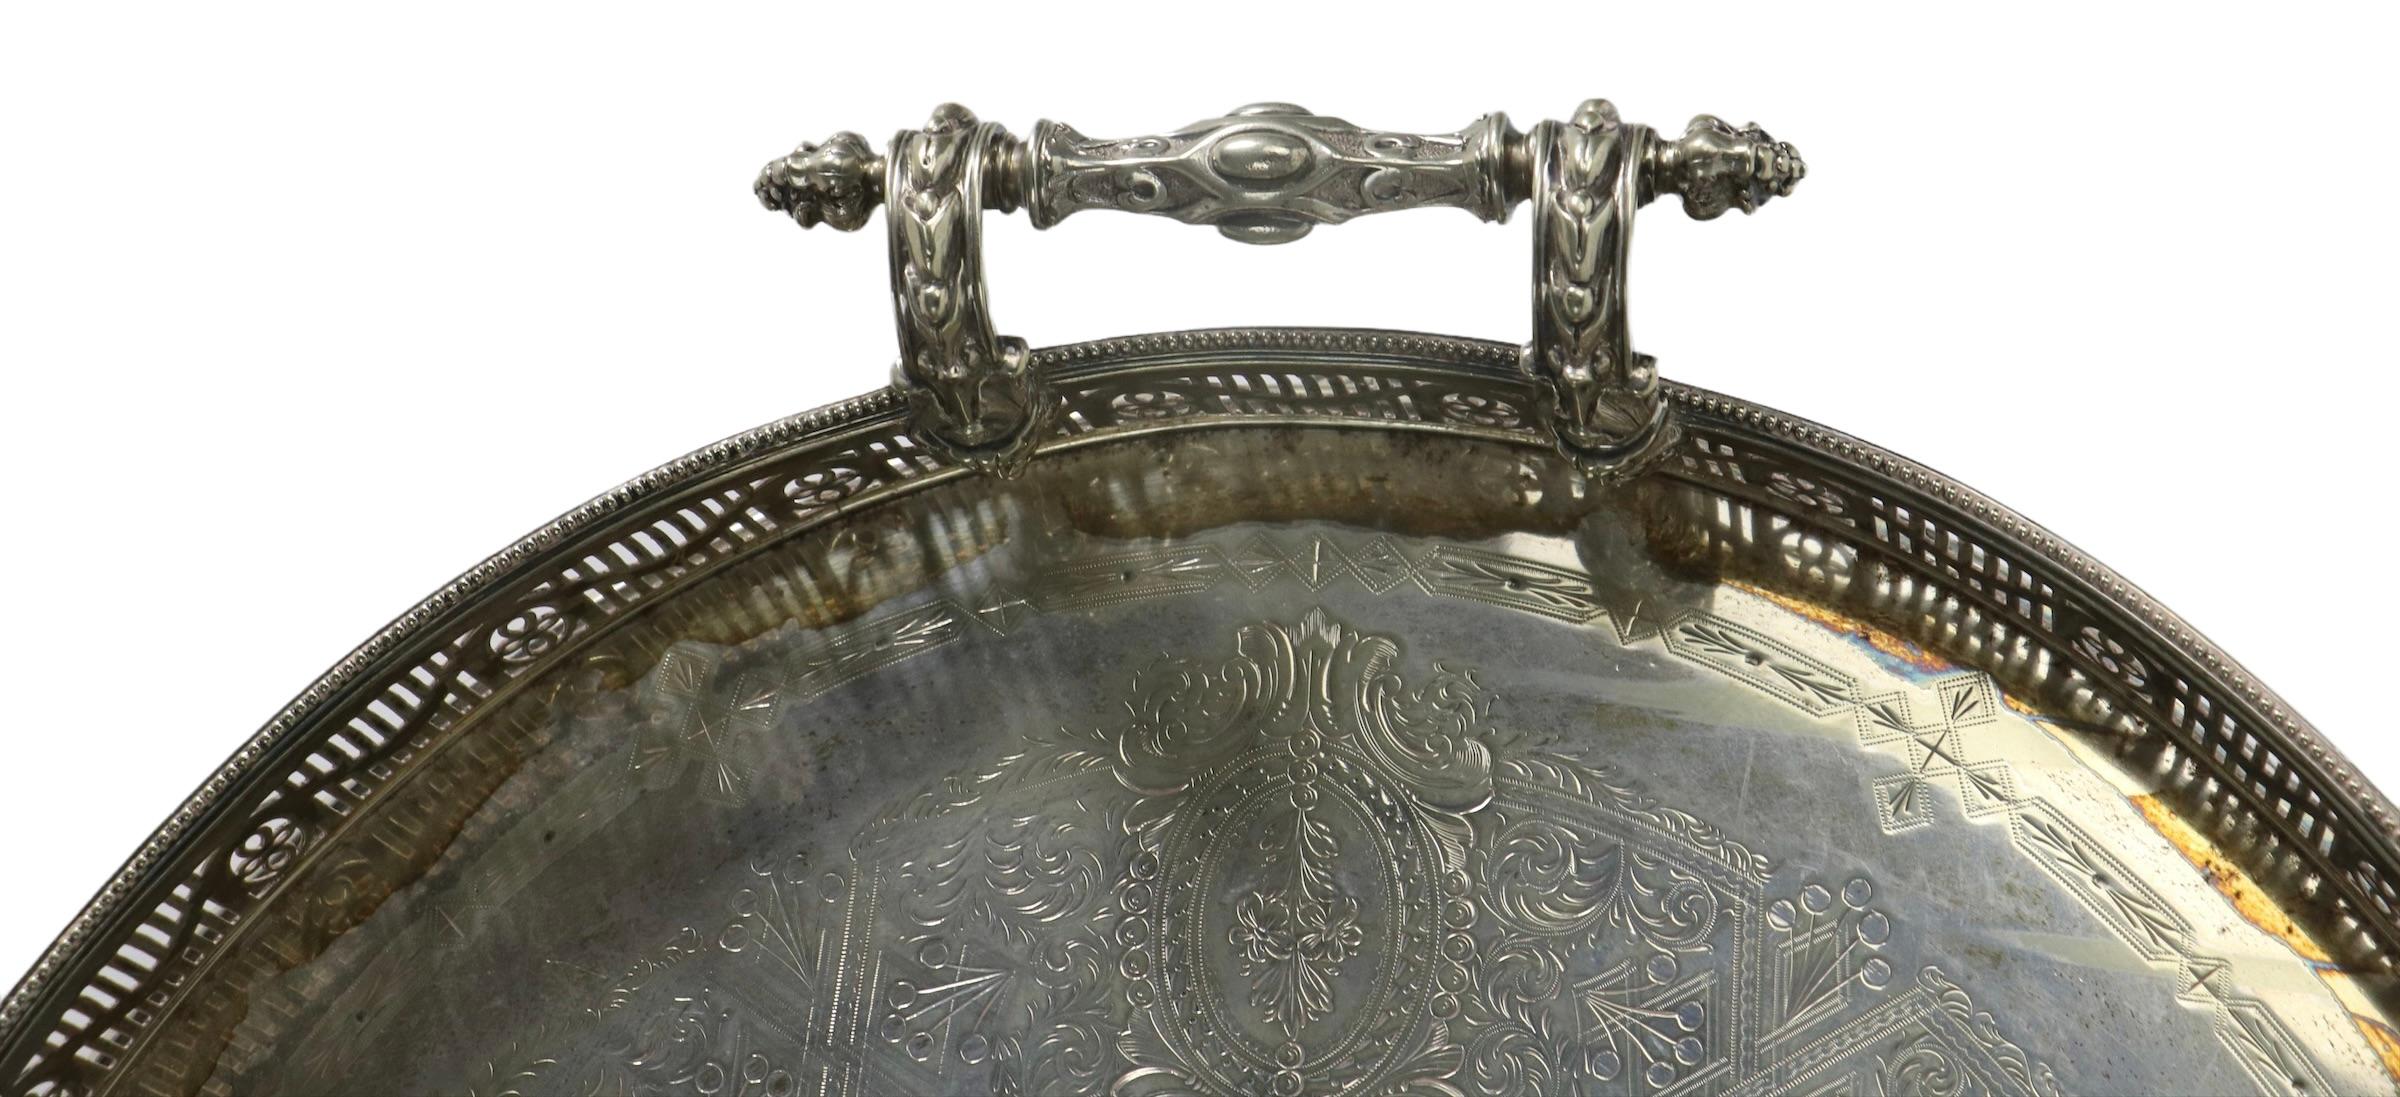 Large Ornate Oval Footed Victorian Silver Plate Tray with Gallery and Handles For Sale 8